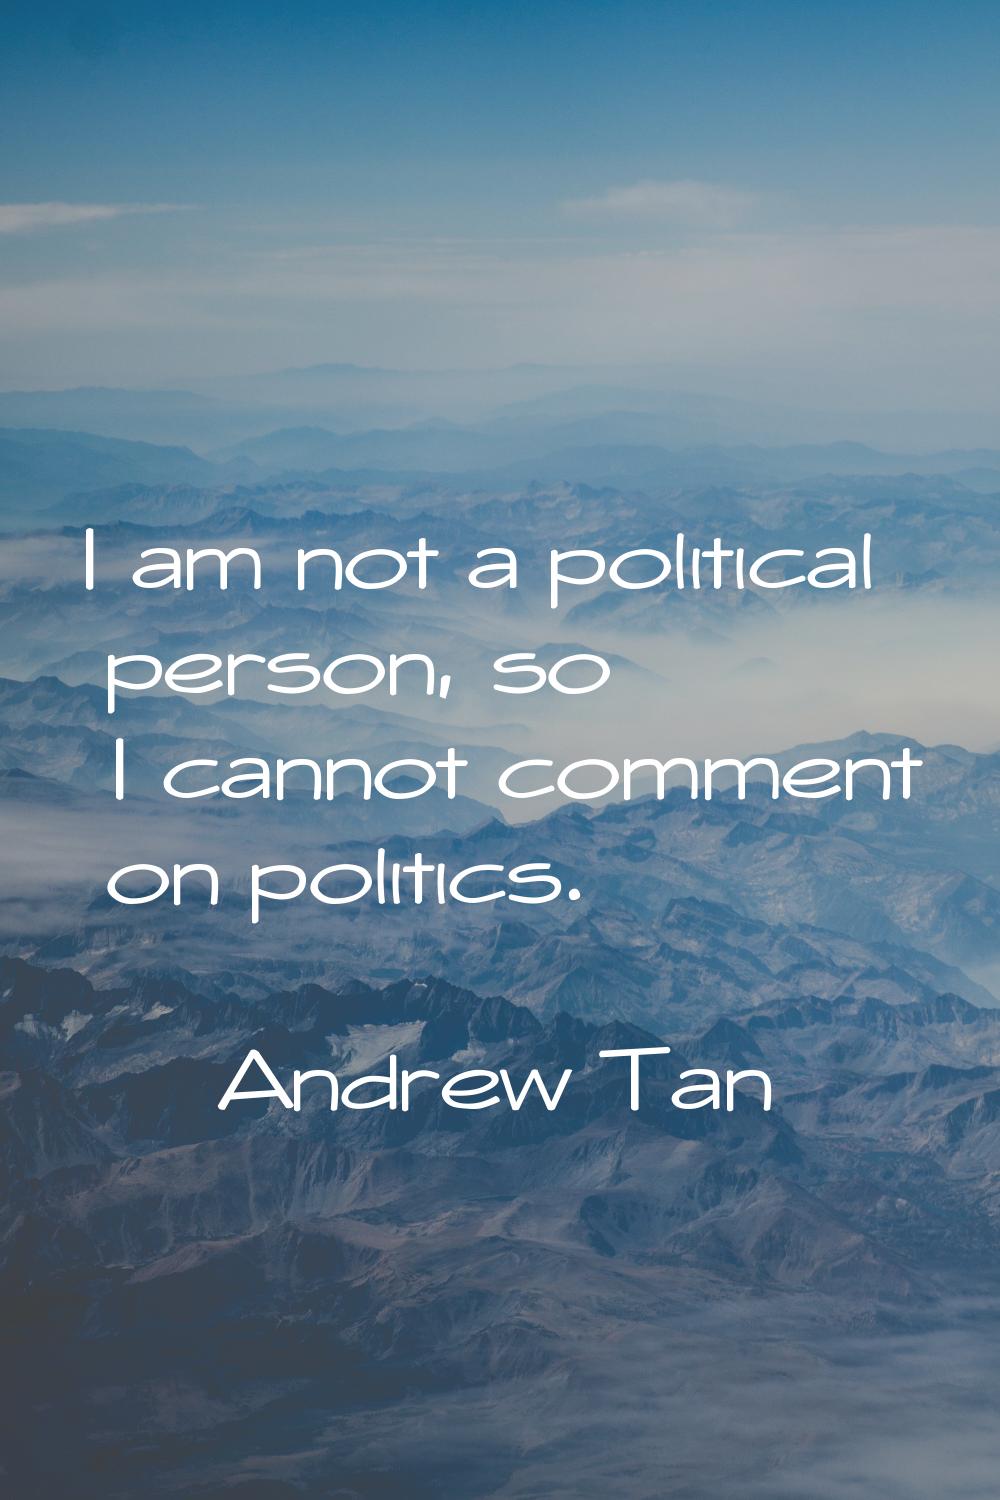 I am not a political person, so I cannot comment on politics.